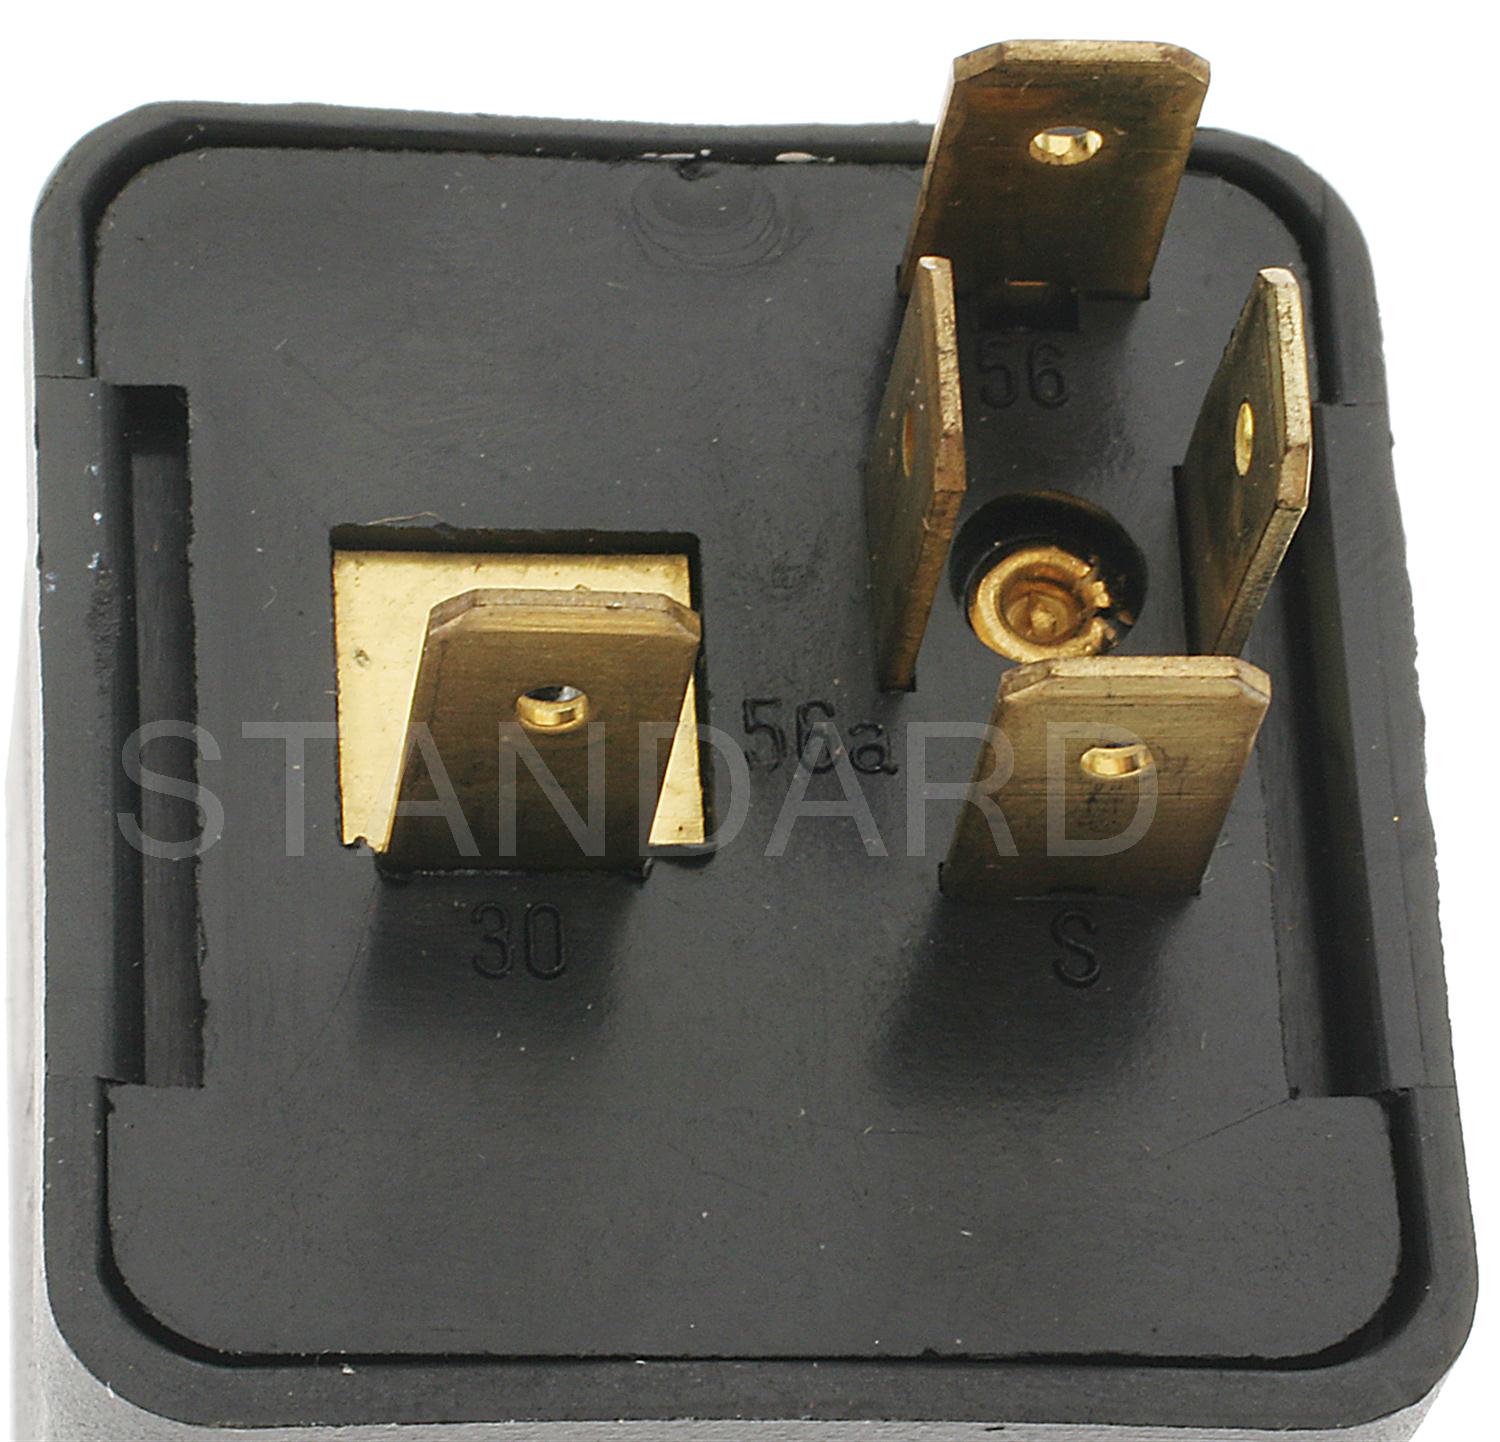 Picture of Standard Motor Products LR35 Headlight Relay